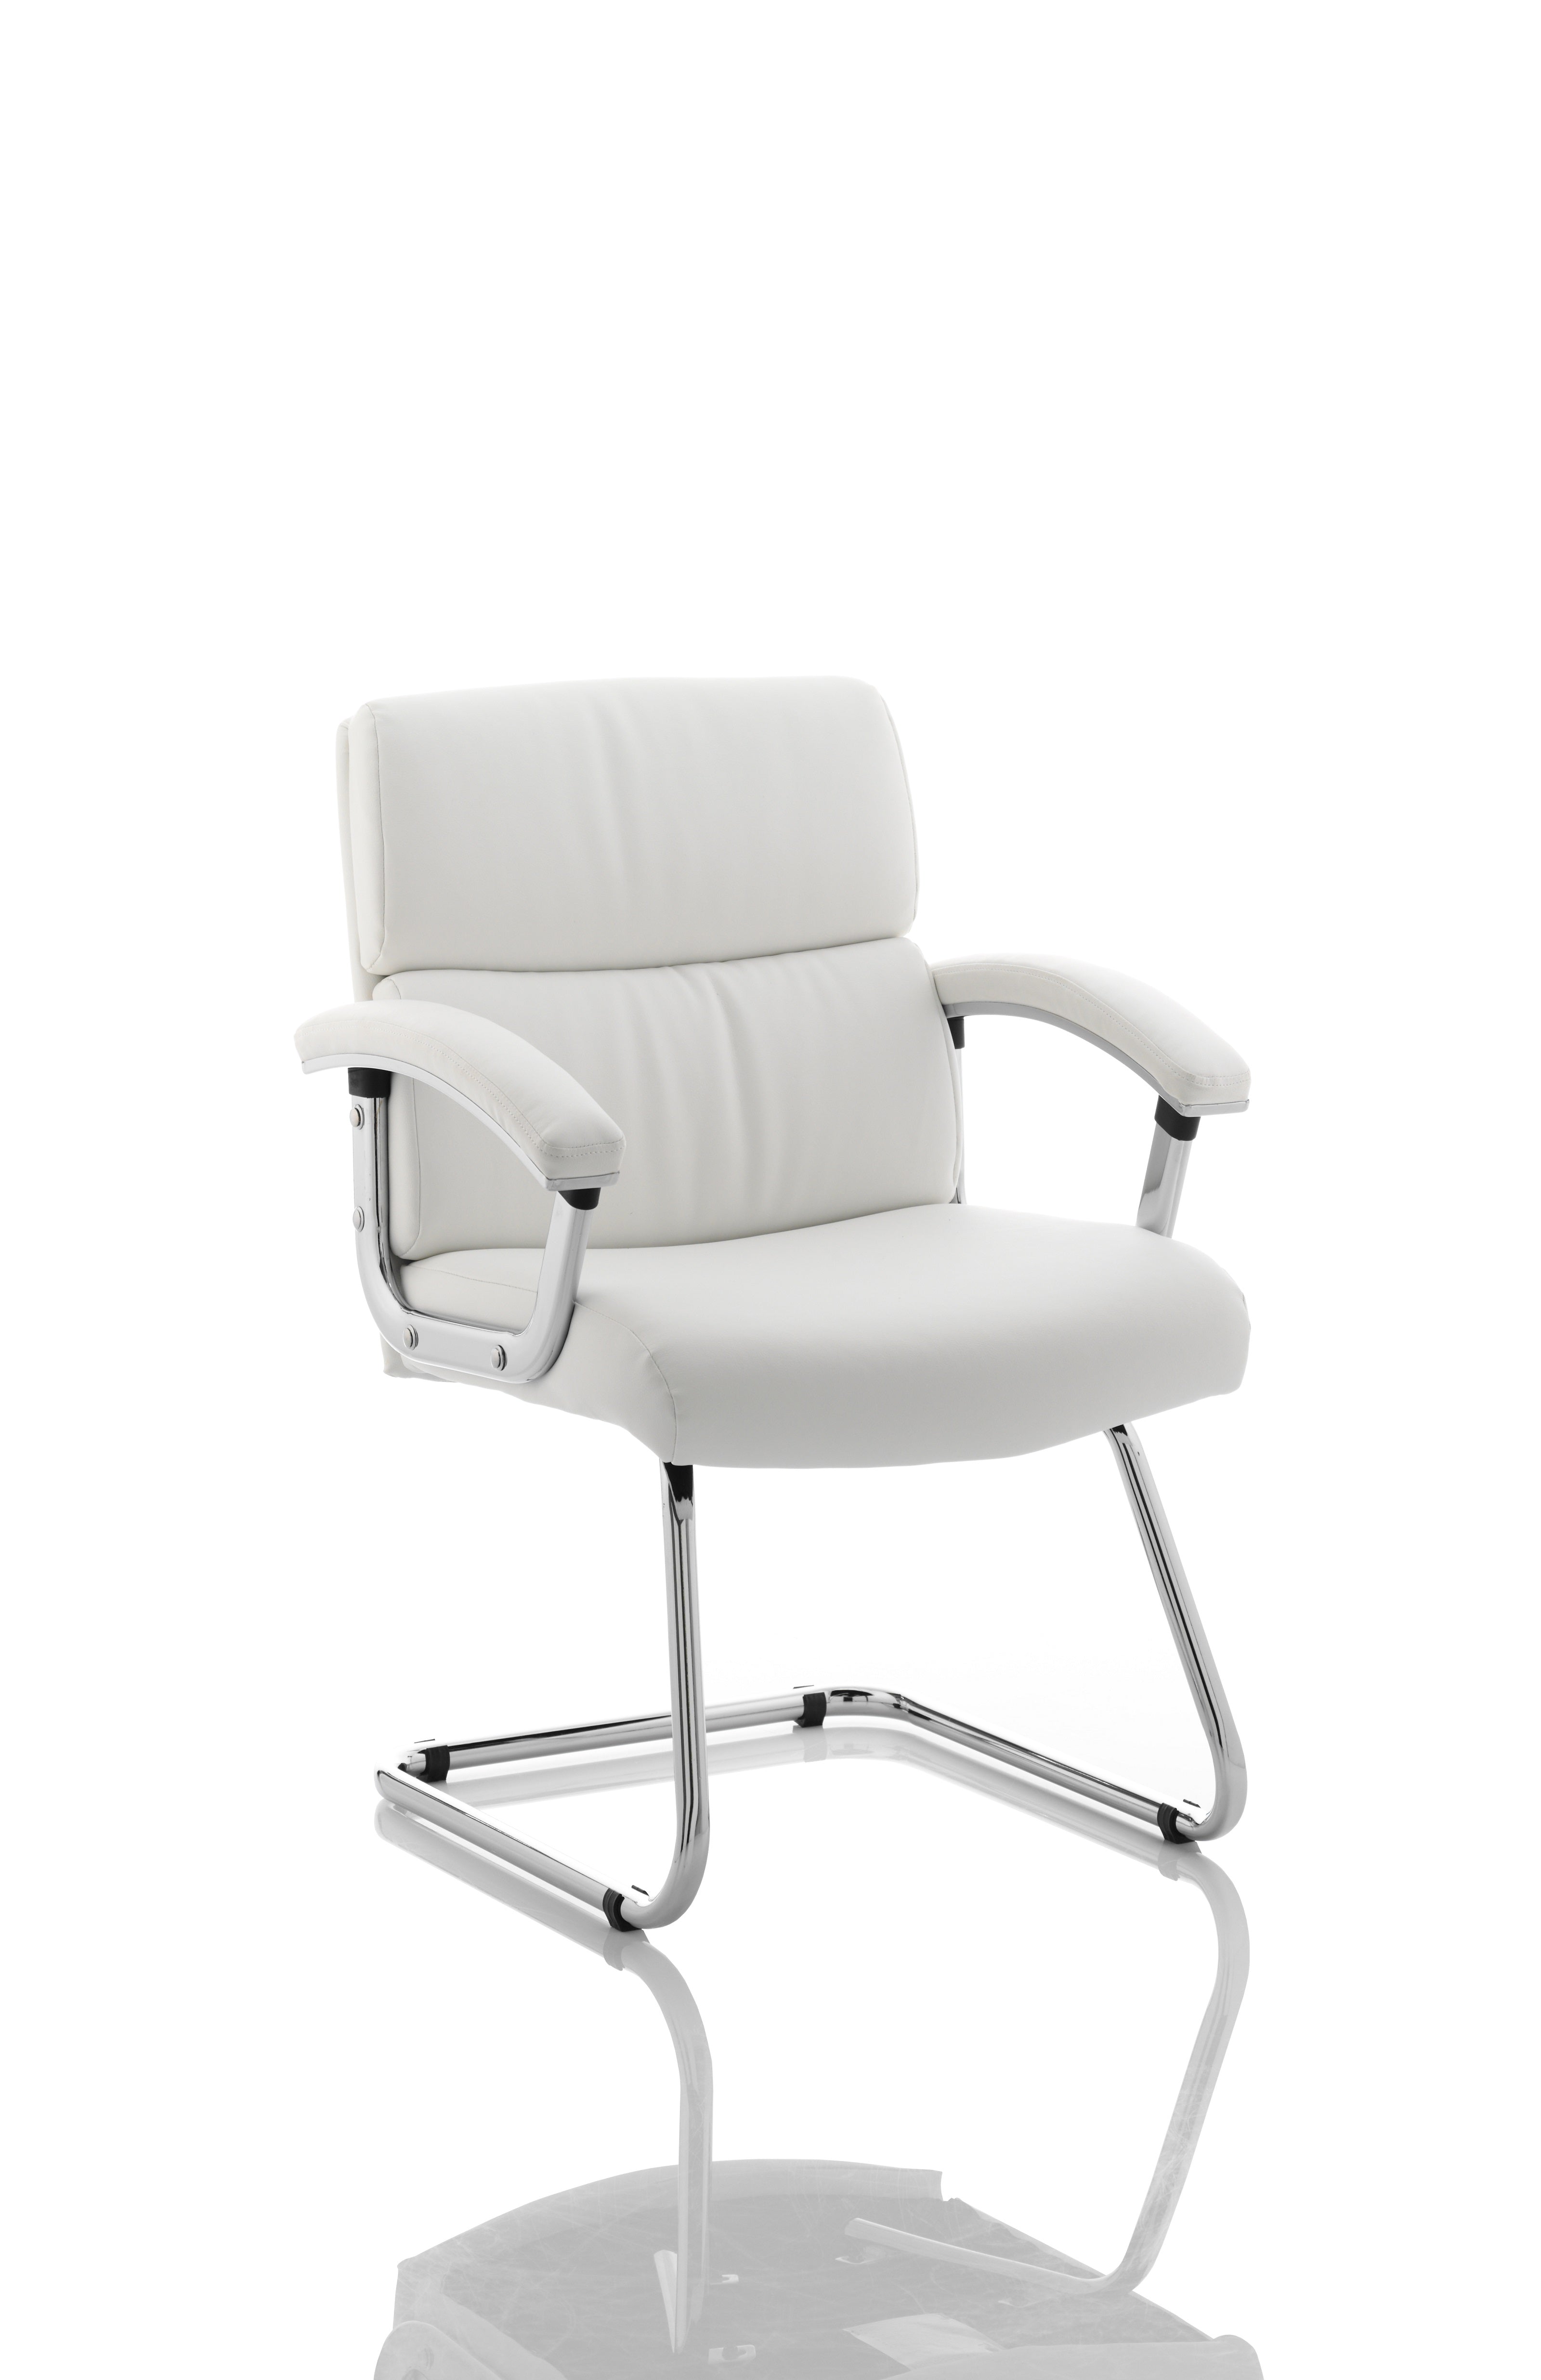 Desire Cantilever Chair Black With Arms